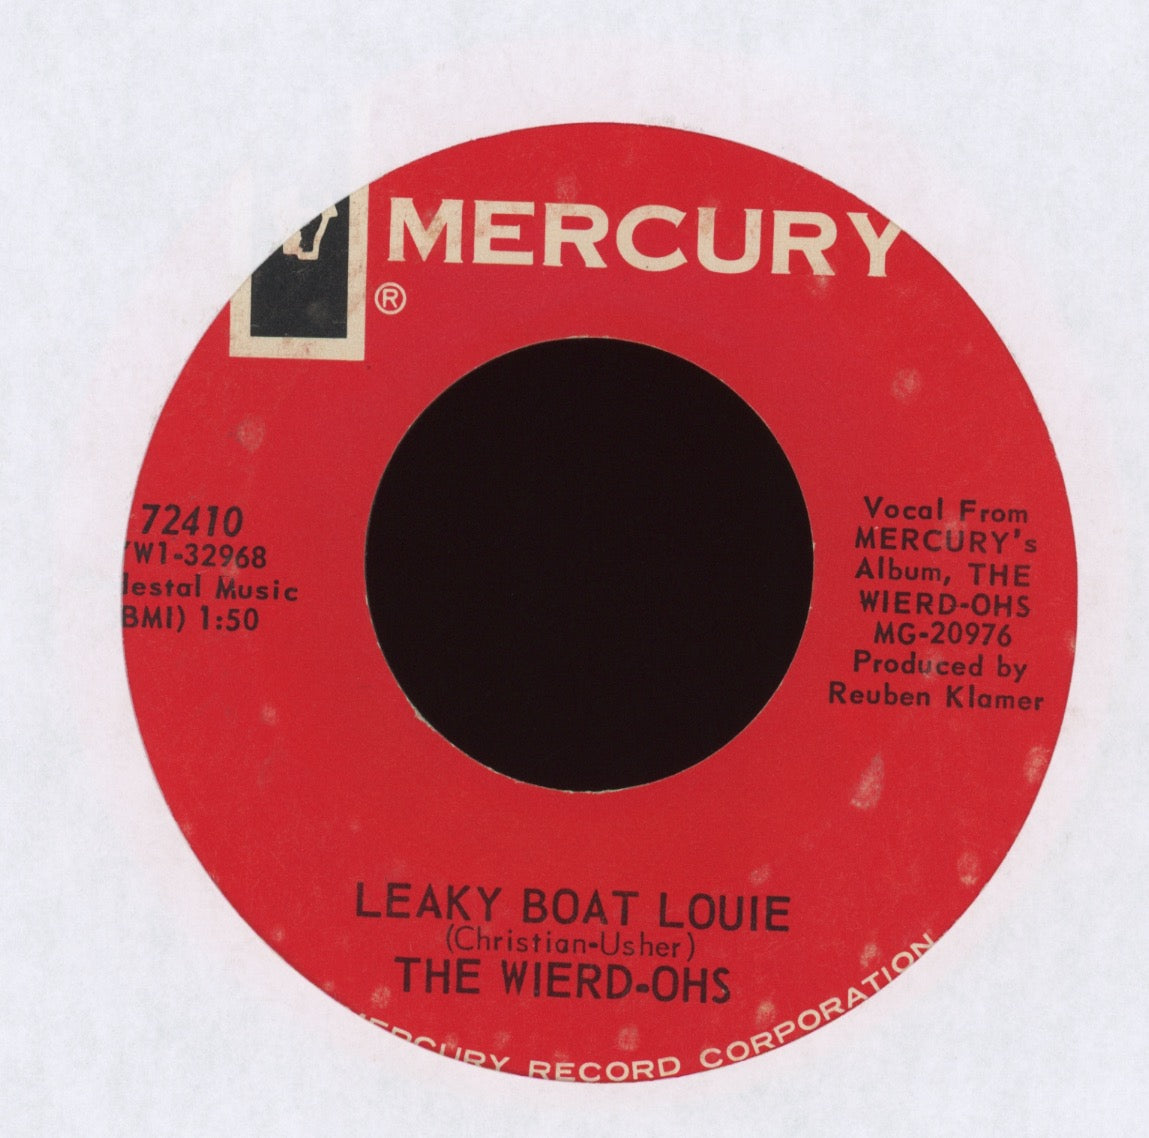 The Weird-Ohs - Leaky Boat Louie on Smash